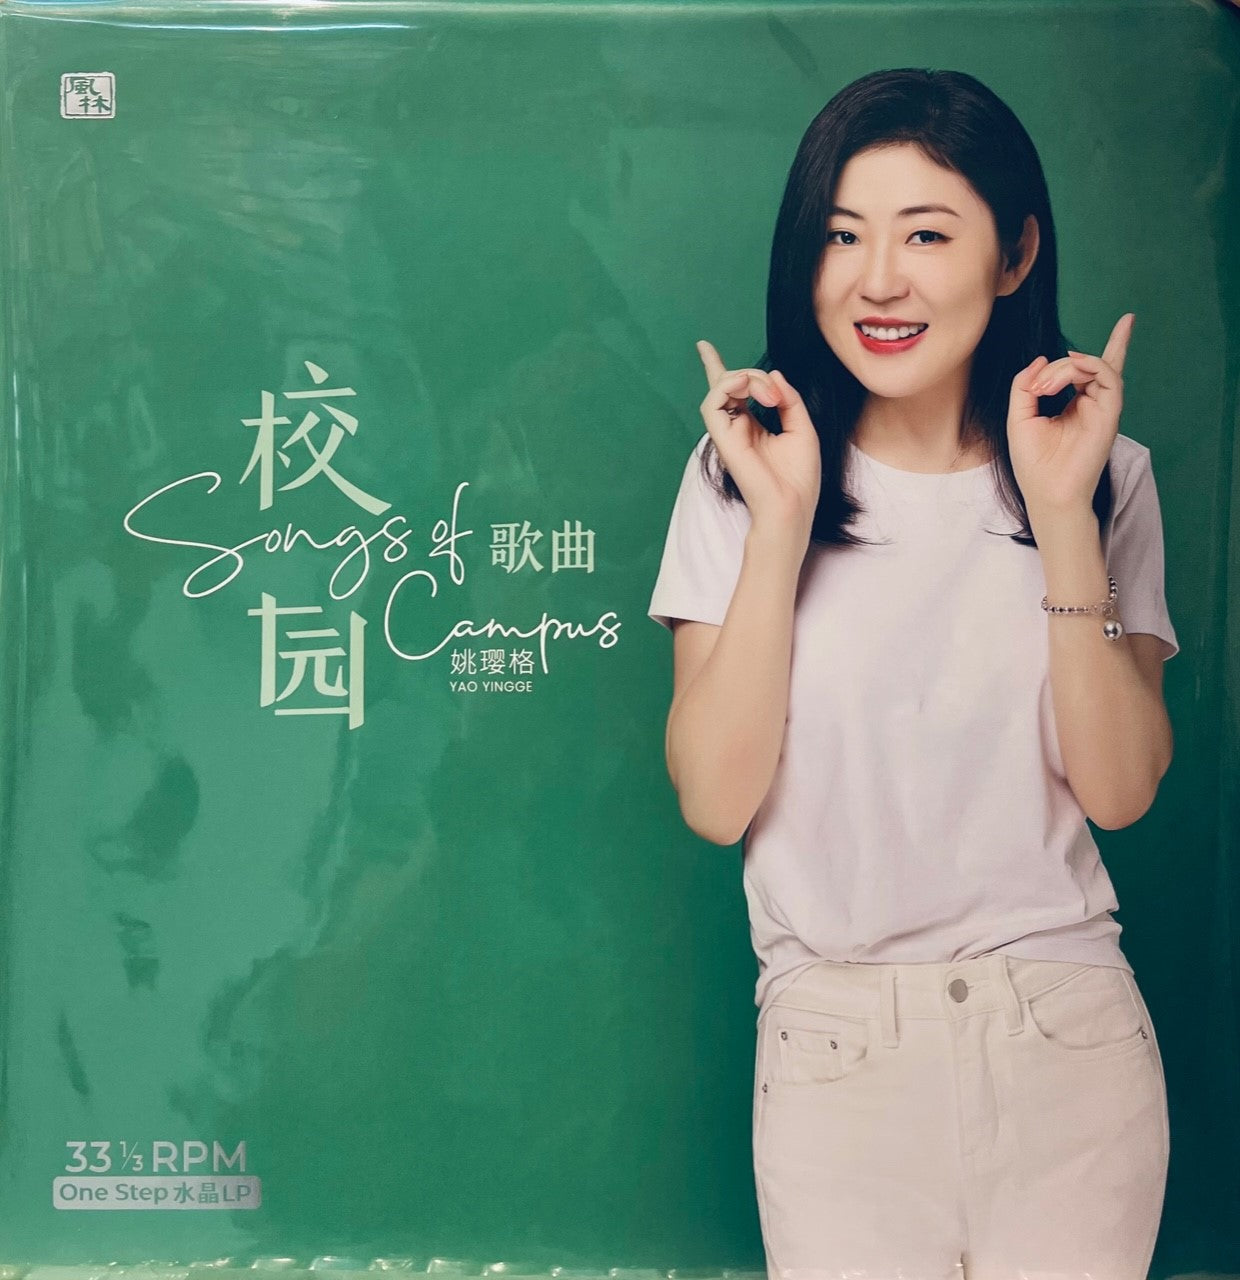 YAO YING GE - 姚瓔格 SONG OF CAMPUS 校園歌曲 (CLEARED) VINYL